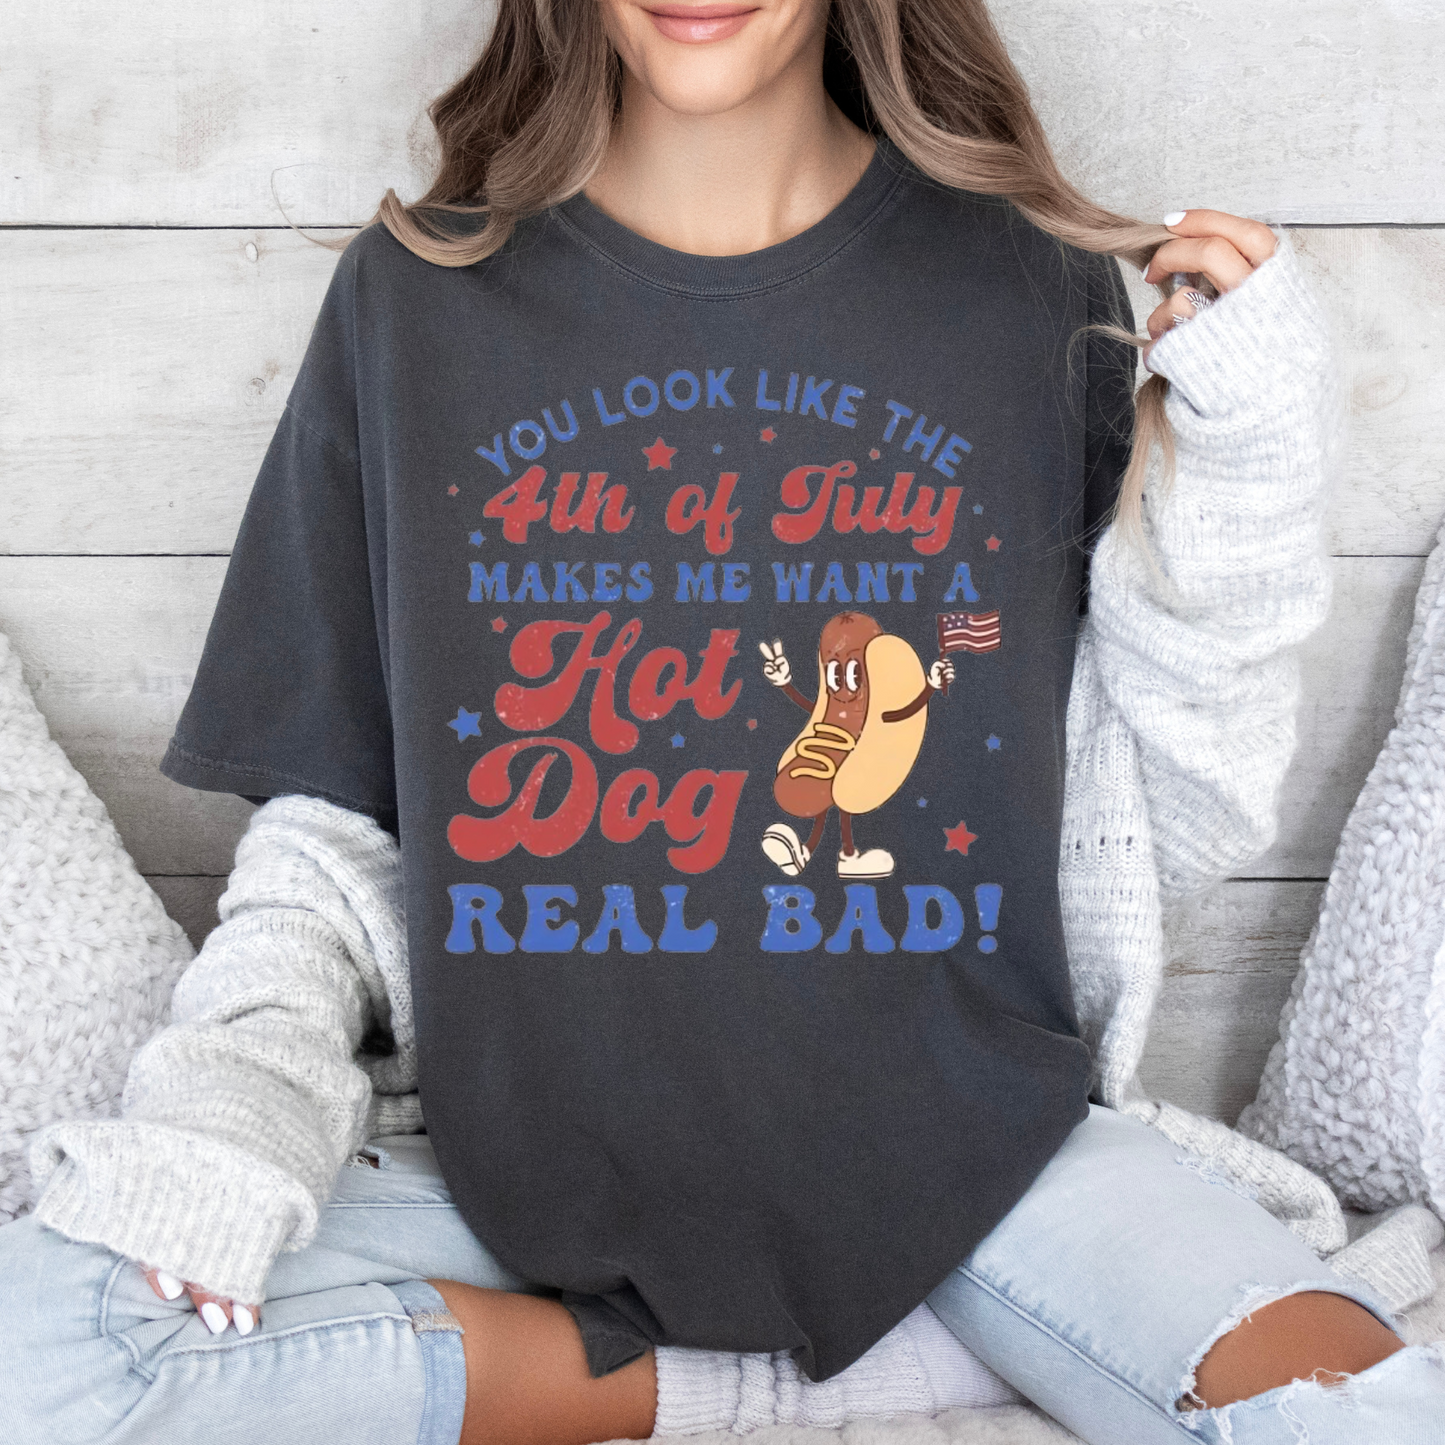 You Look Like the Fourth of July T-shirt